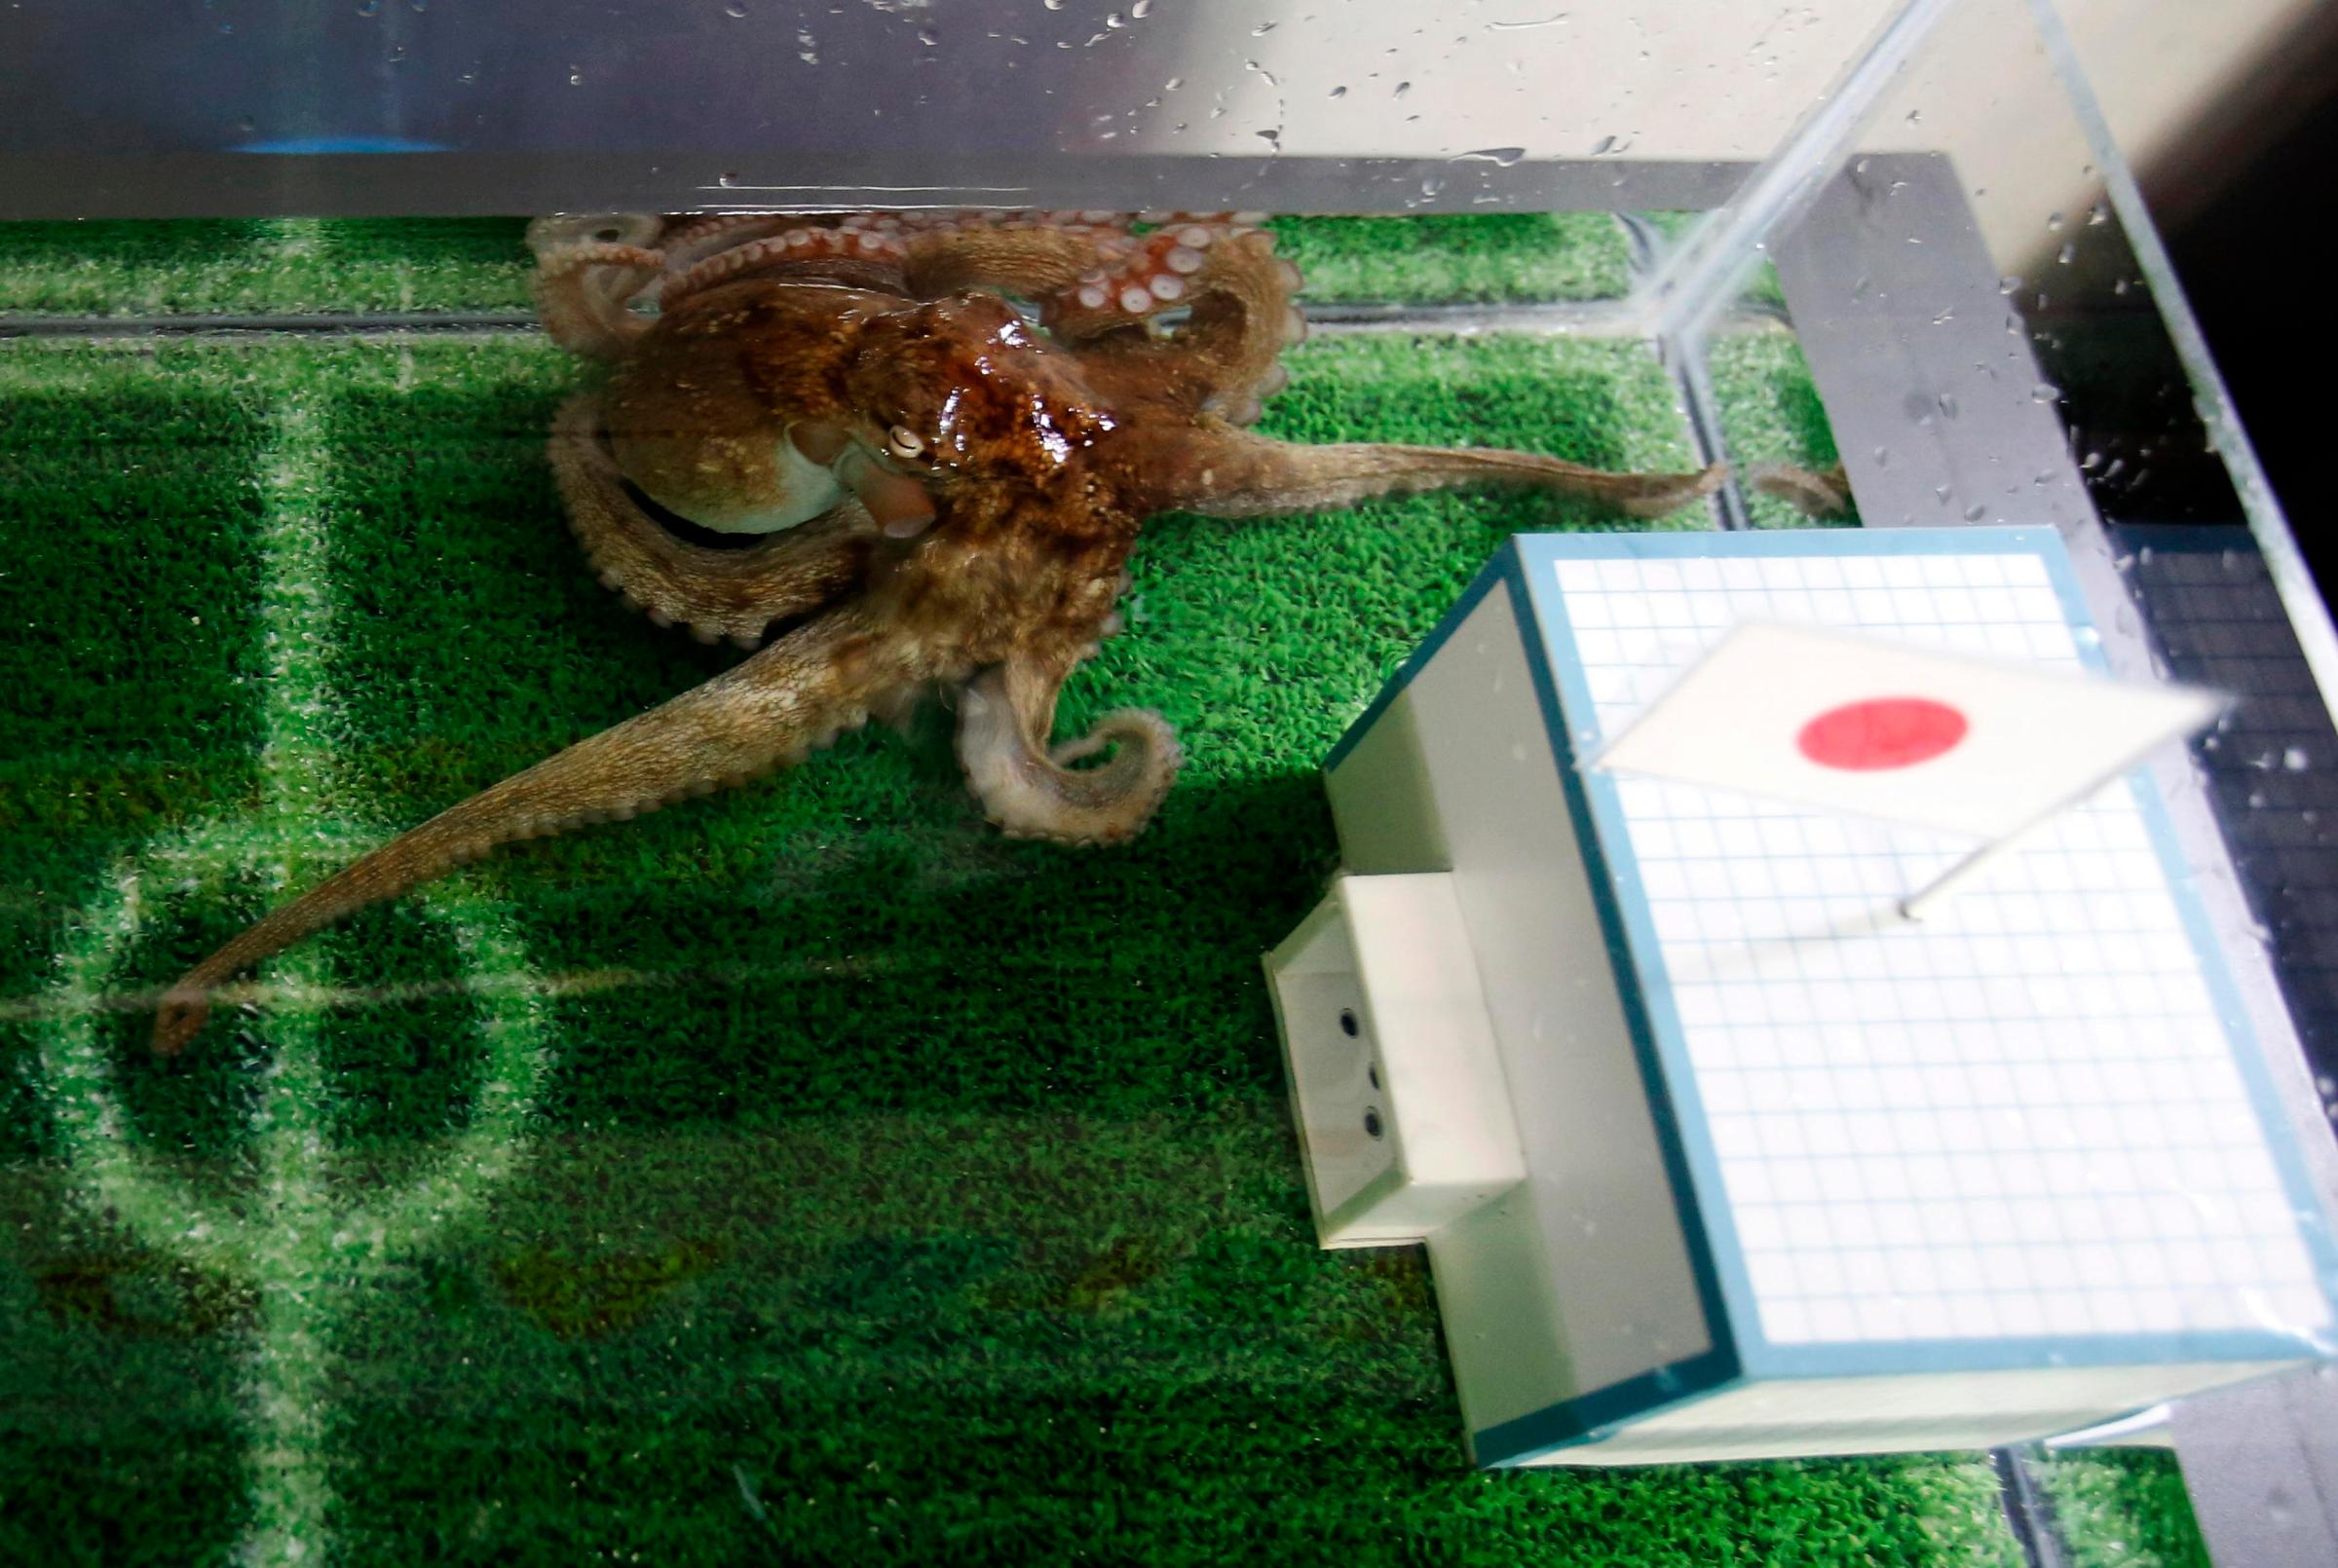 An octopus named Hacchan predicts Japan's victory in their match against Ivory Coast by choosing the mock goal with the Japanese national flag, at Shinagawa Aqua Stadium aquarium in Tokyo June 13, 2014.